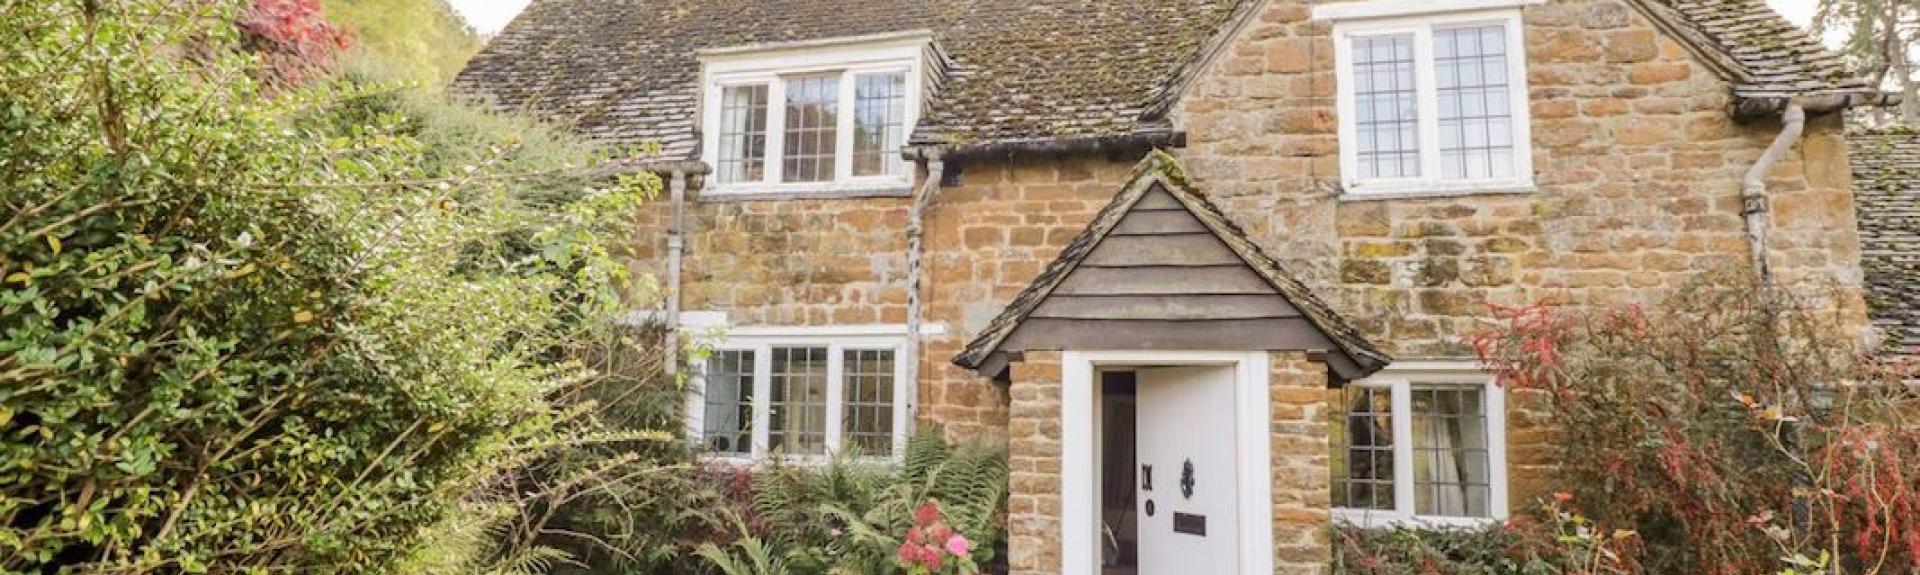 2-storey stone-built Cotswold Cottage surrounded by a mature garden.